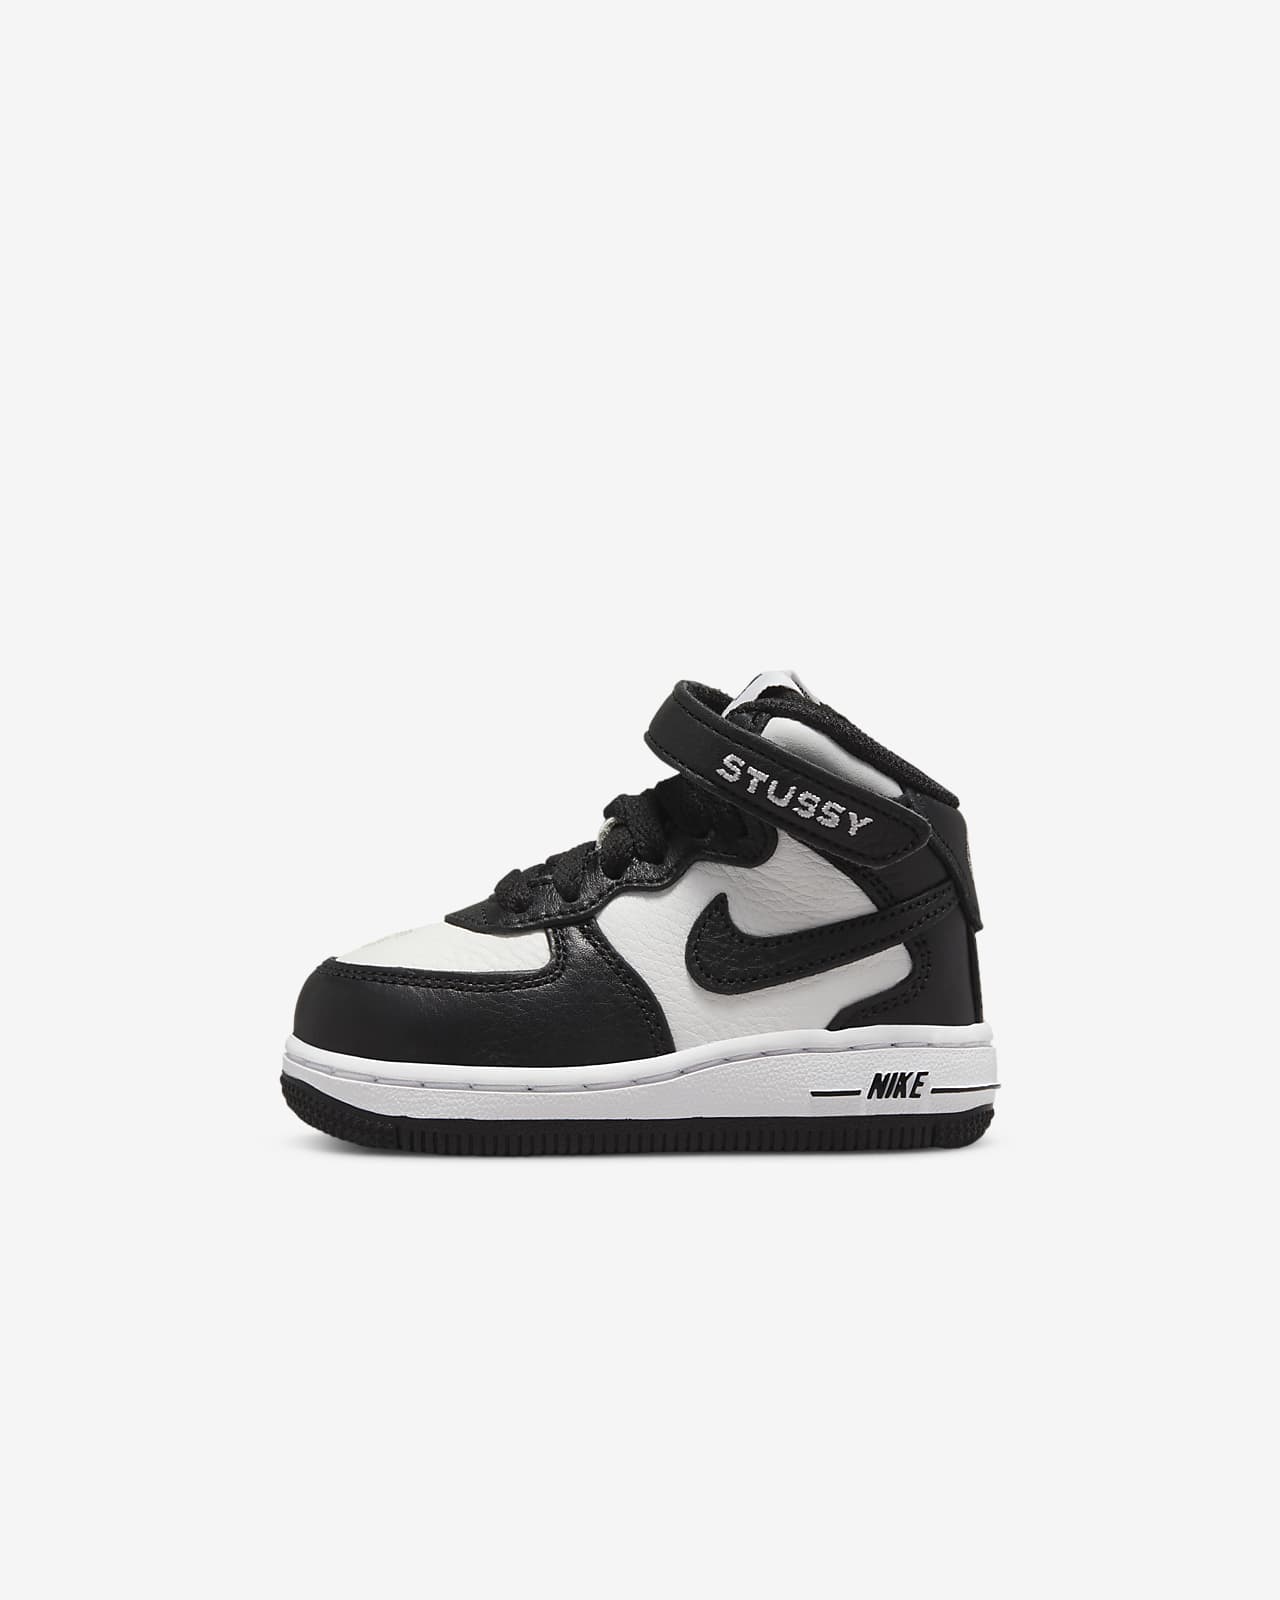 Nike x Stüssy Force 1 Mid Baby/Toddler Shoes